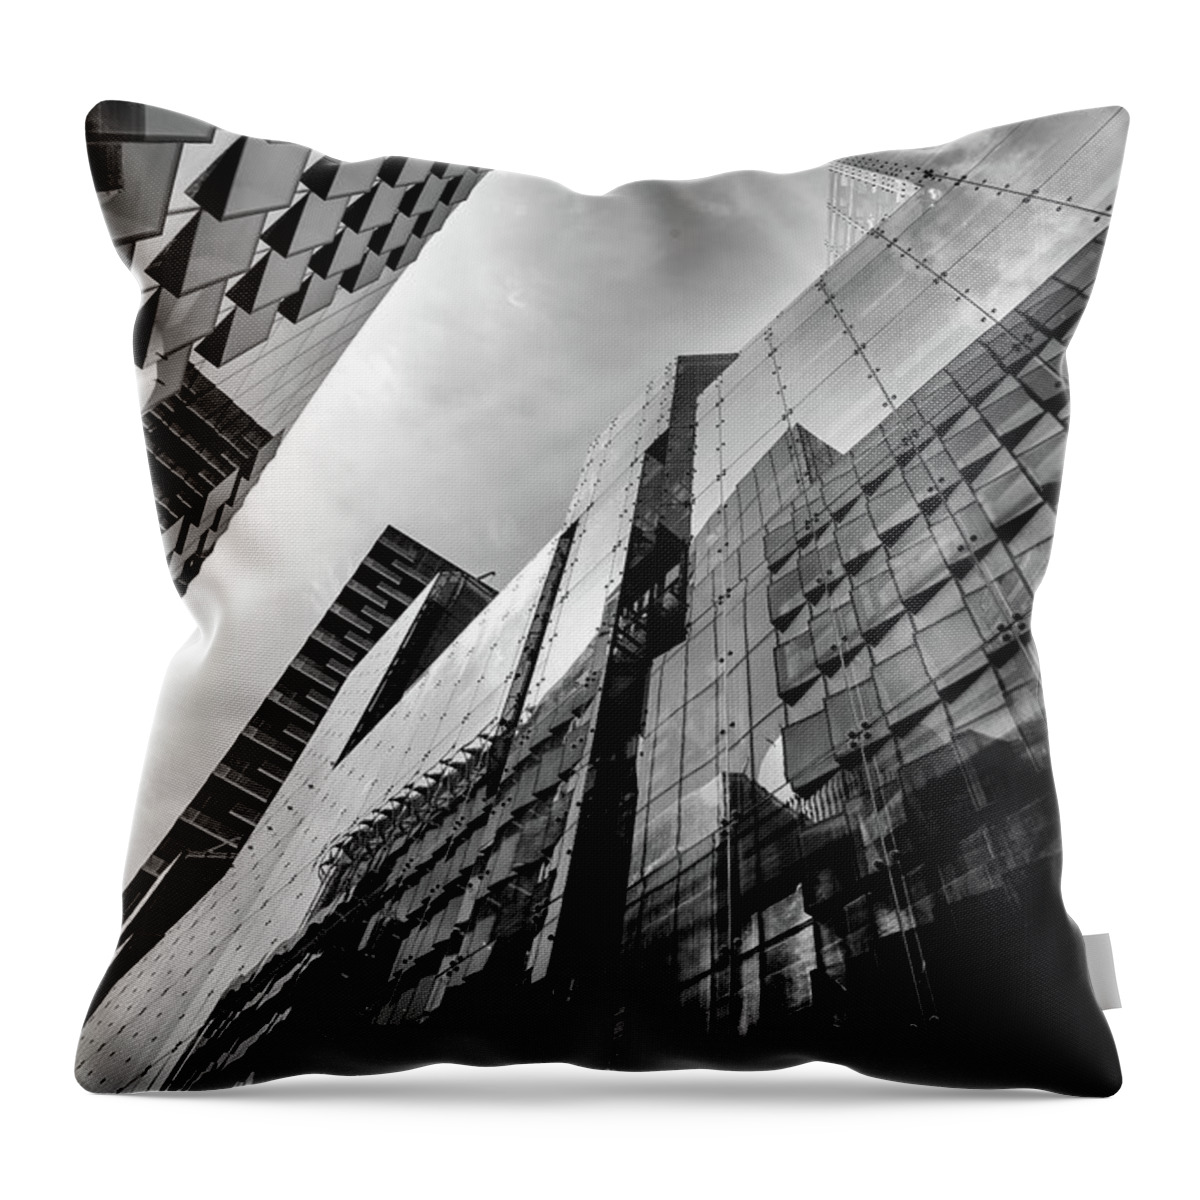 Glass Throw Pillow featuring the photograph Glass Business Window Building Abstract London by John Williams